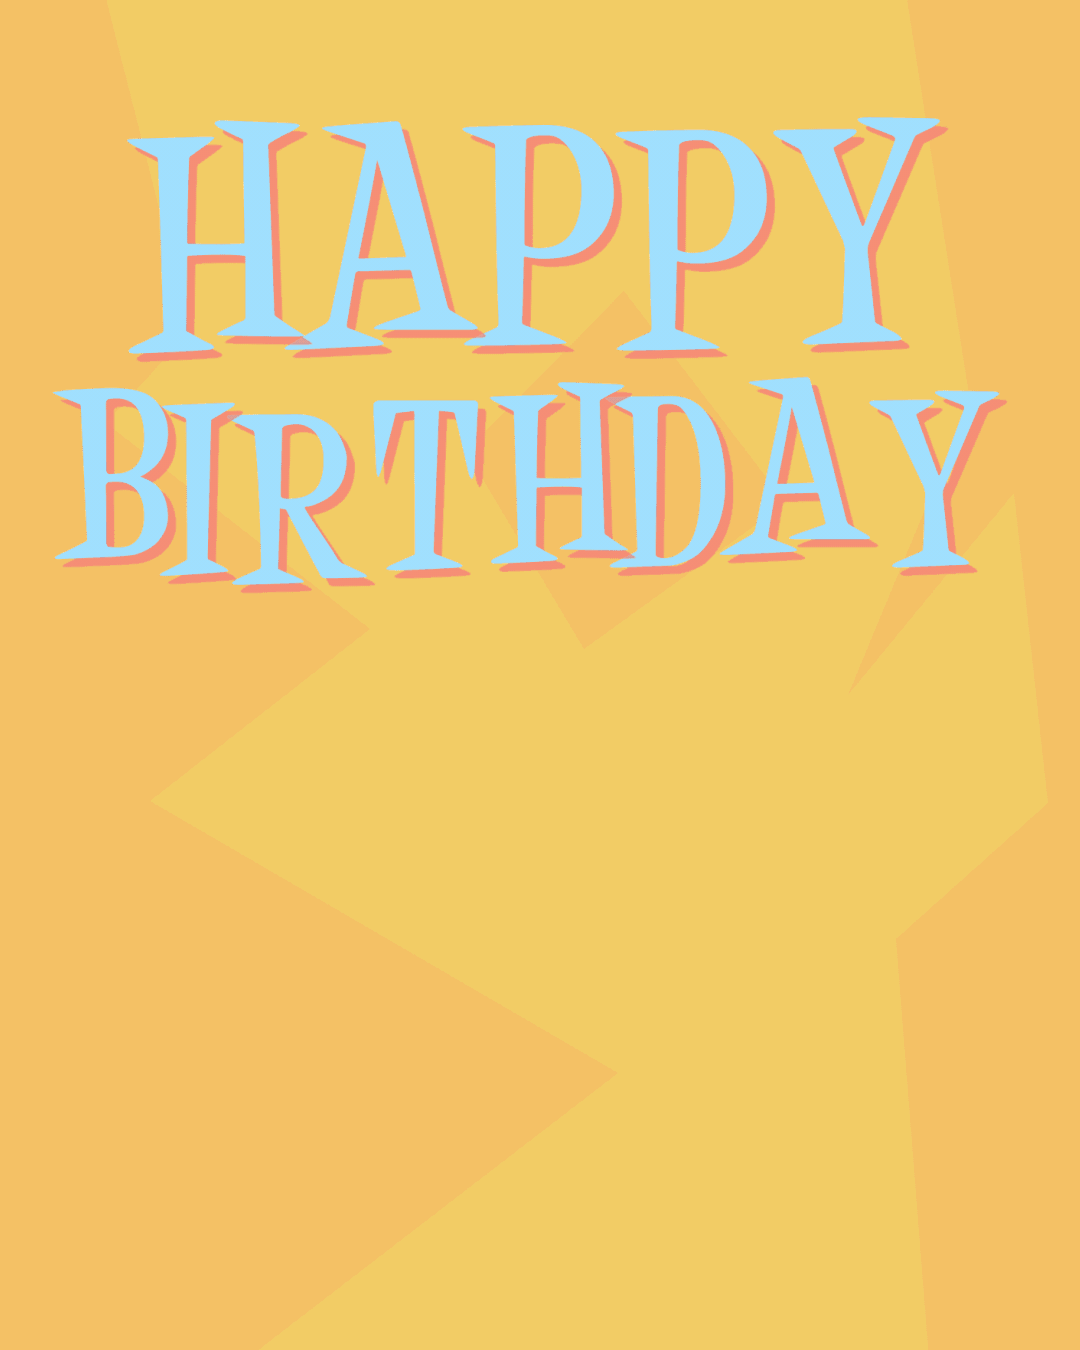 Free Happy Birthday Animated Images and GIFs for Guy | Birthdayyou.com